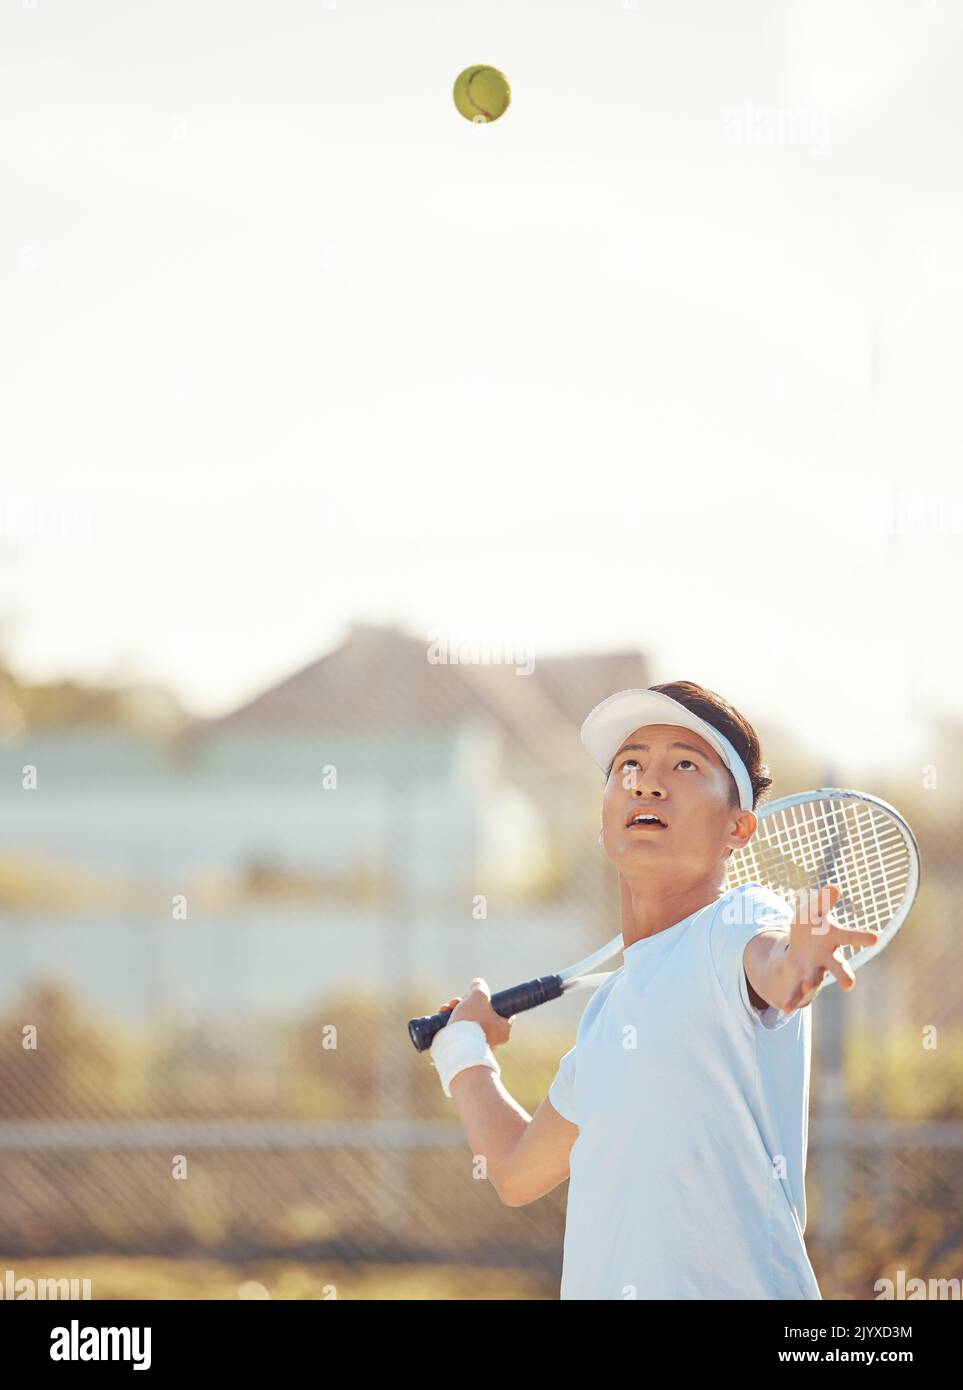 Tennis ball, serving and competitive sports man training or playing a match of game with a racket on an outdoor court. Serious, active and asian man Stock Photo